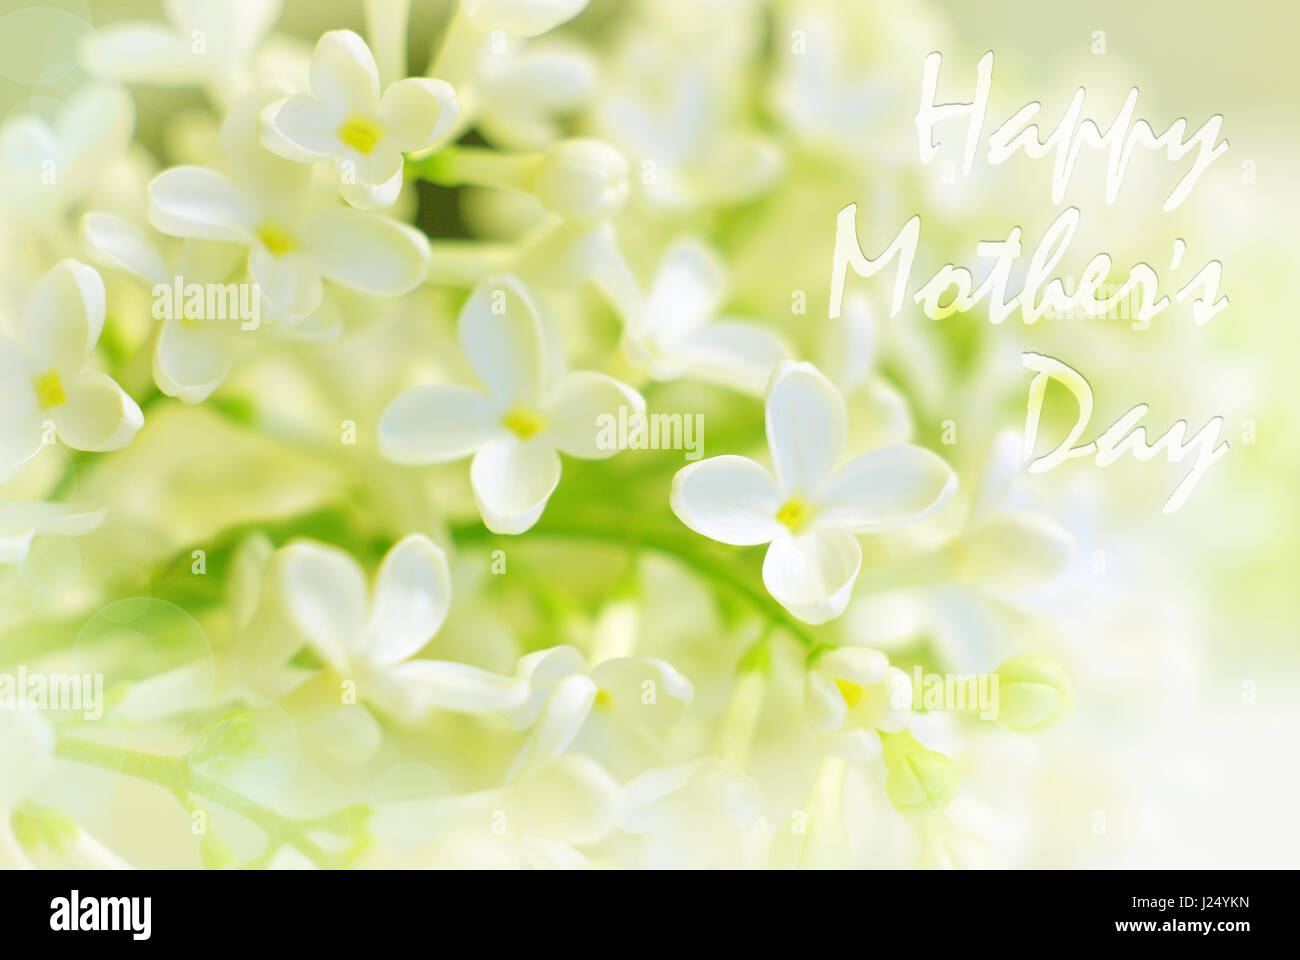 Happy mothers day festive bright flowers card. Spring bloom flowers fresh holiday background. Greeting mother day message. Stock Photo